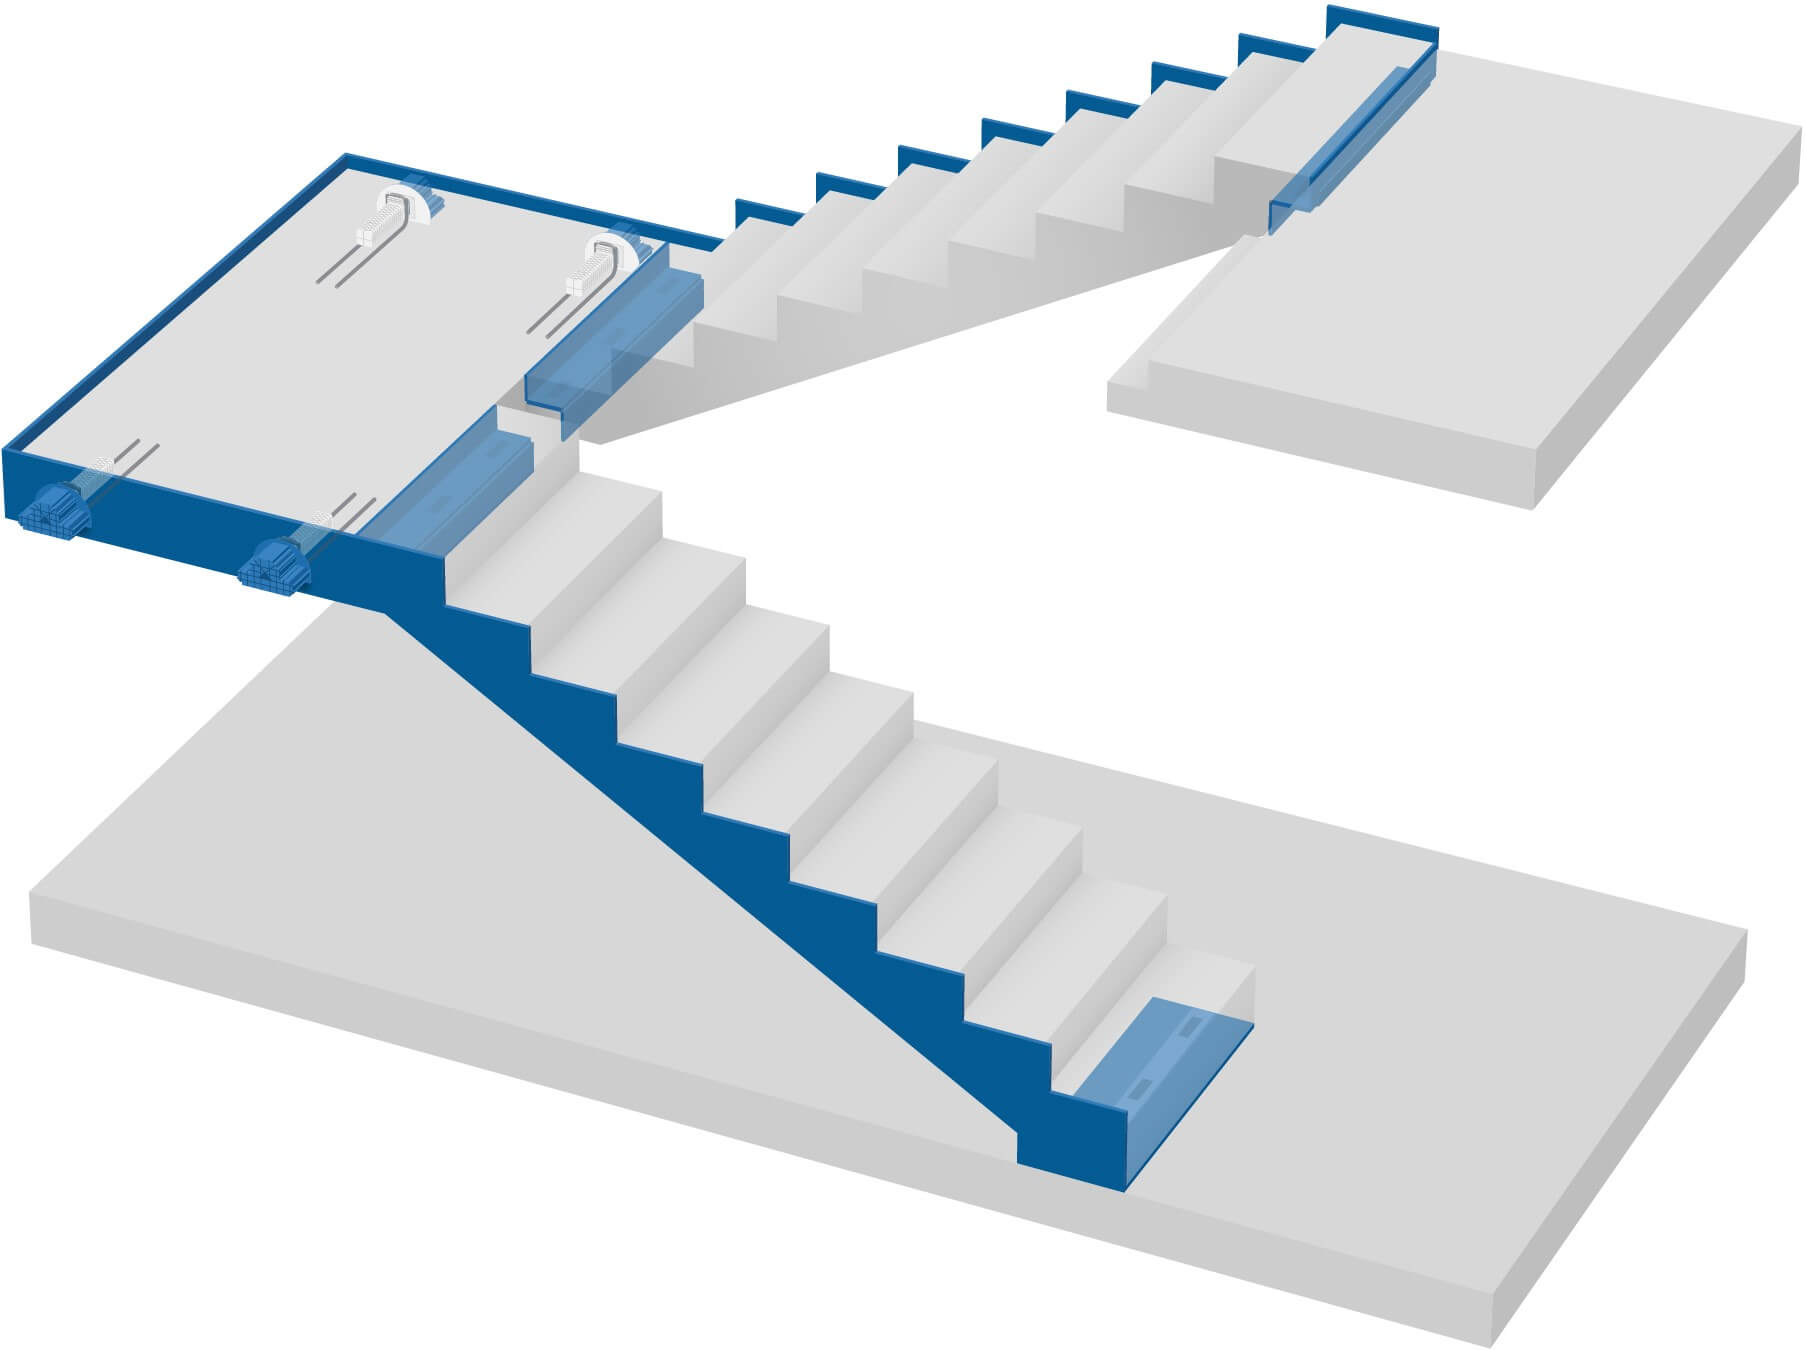 Straight flight of stairs, staircase and landing decoupled – optimized for precast element